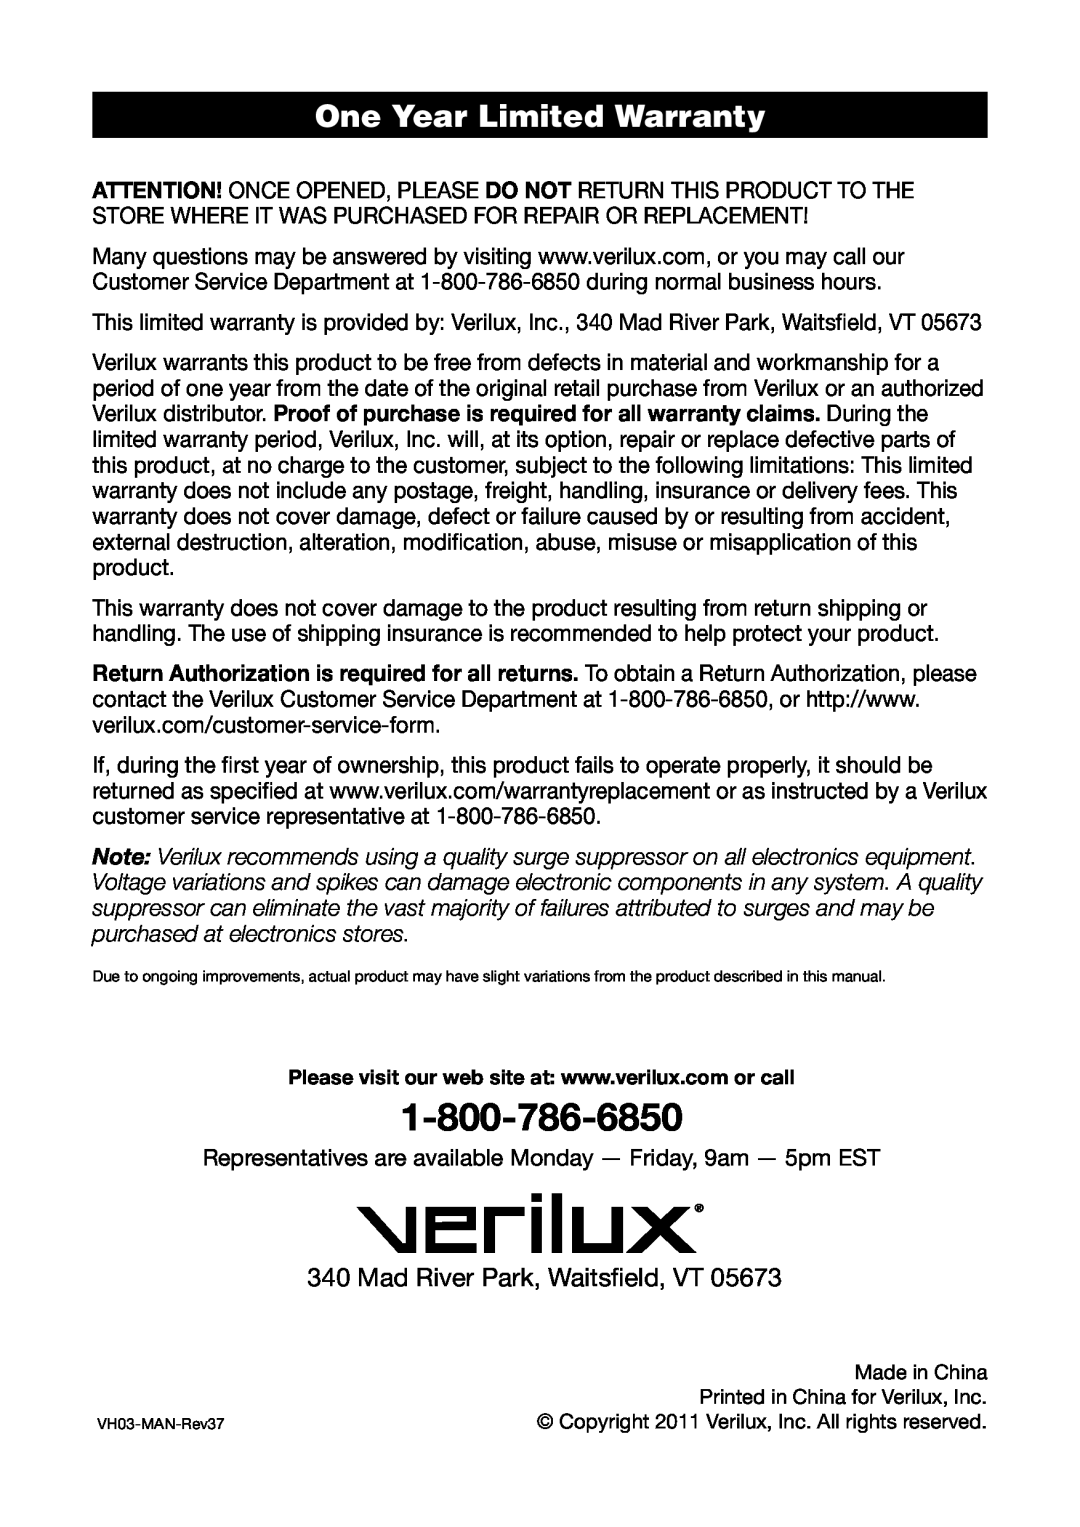 Verilux VH03 manual One Year Limited Warranty, Mad River Park, Waitsfield, VT 